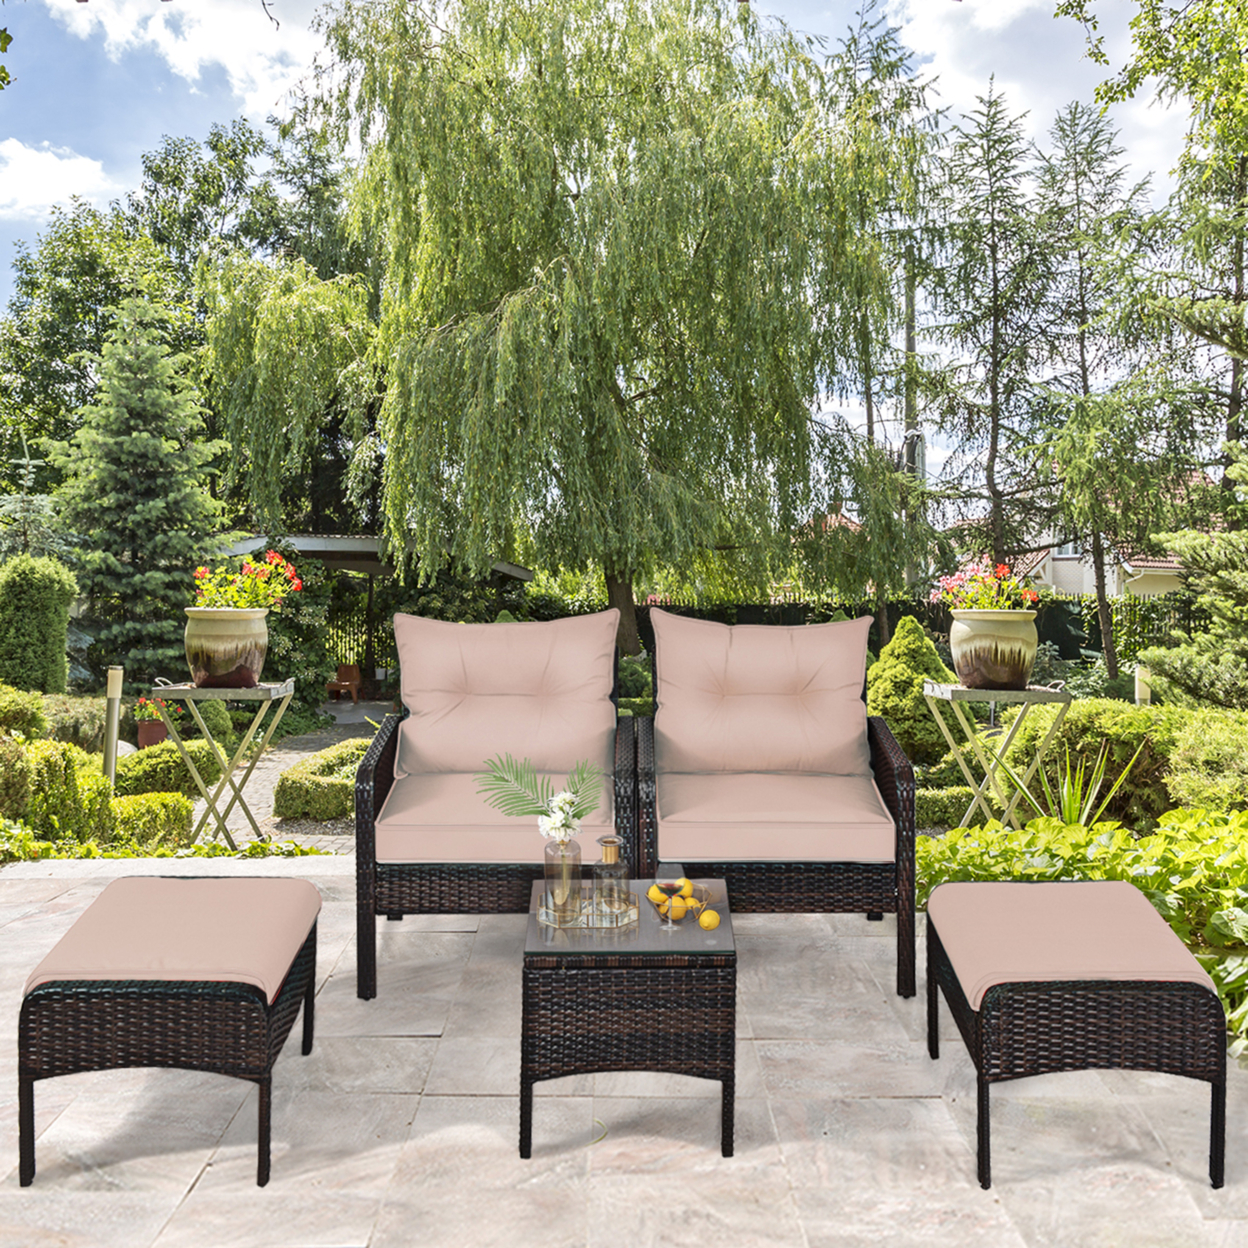 5 PC Patio Set Sectional Rattan Wicker Furniture Set Home Outdoor